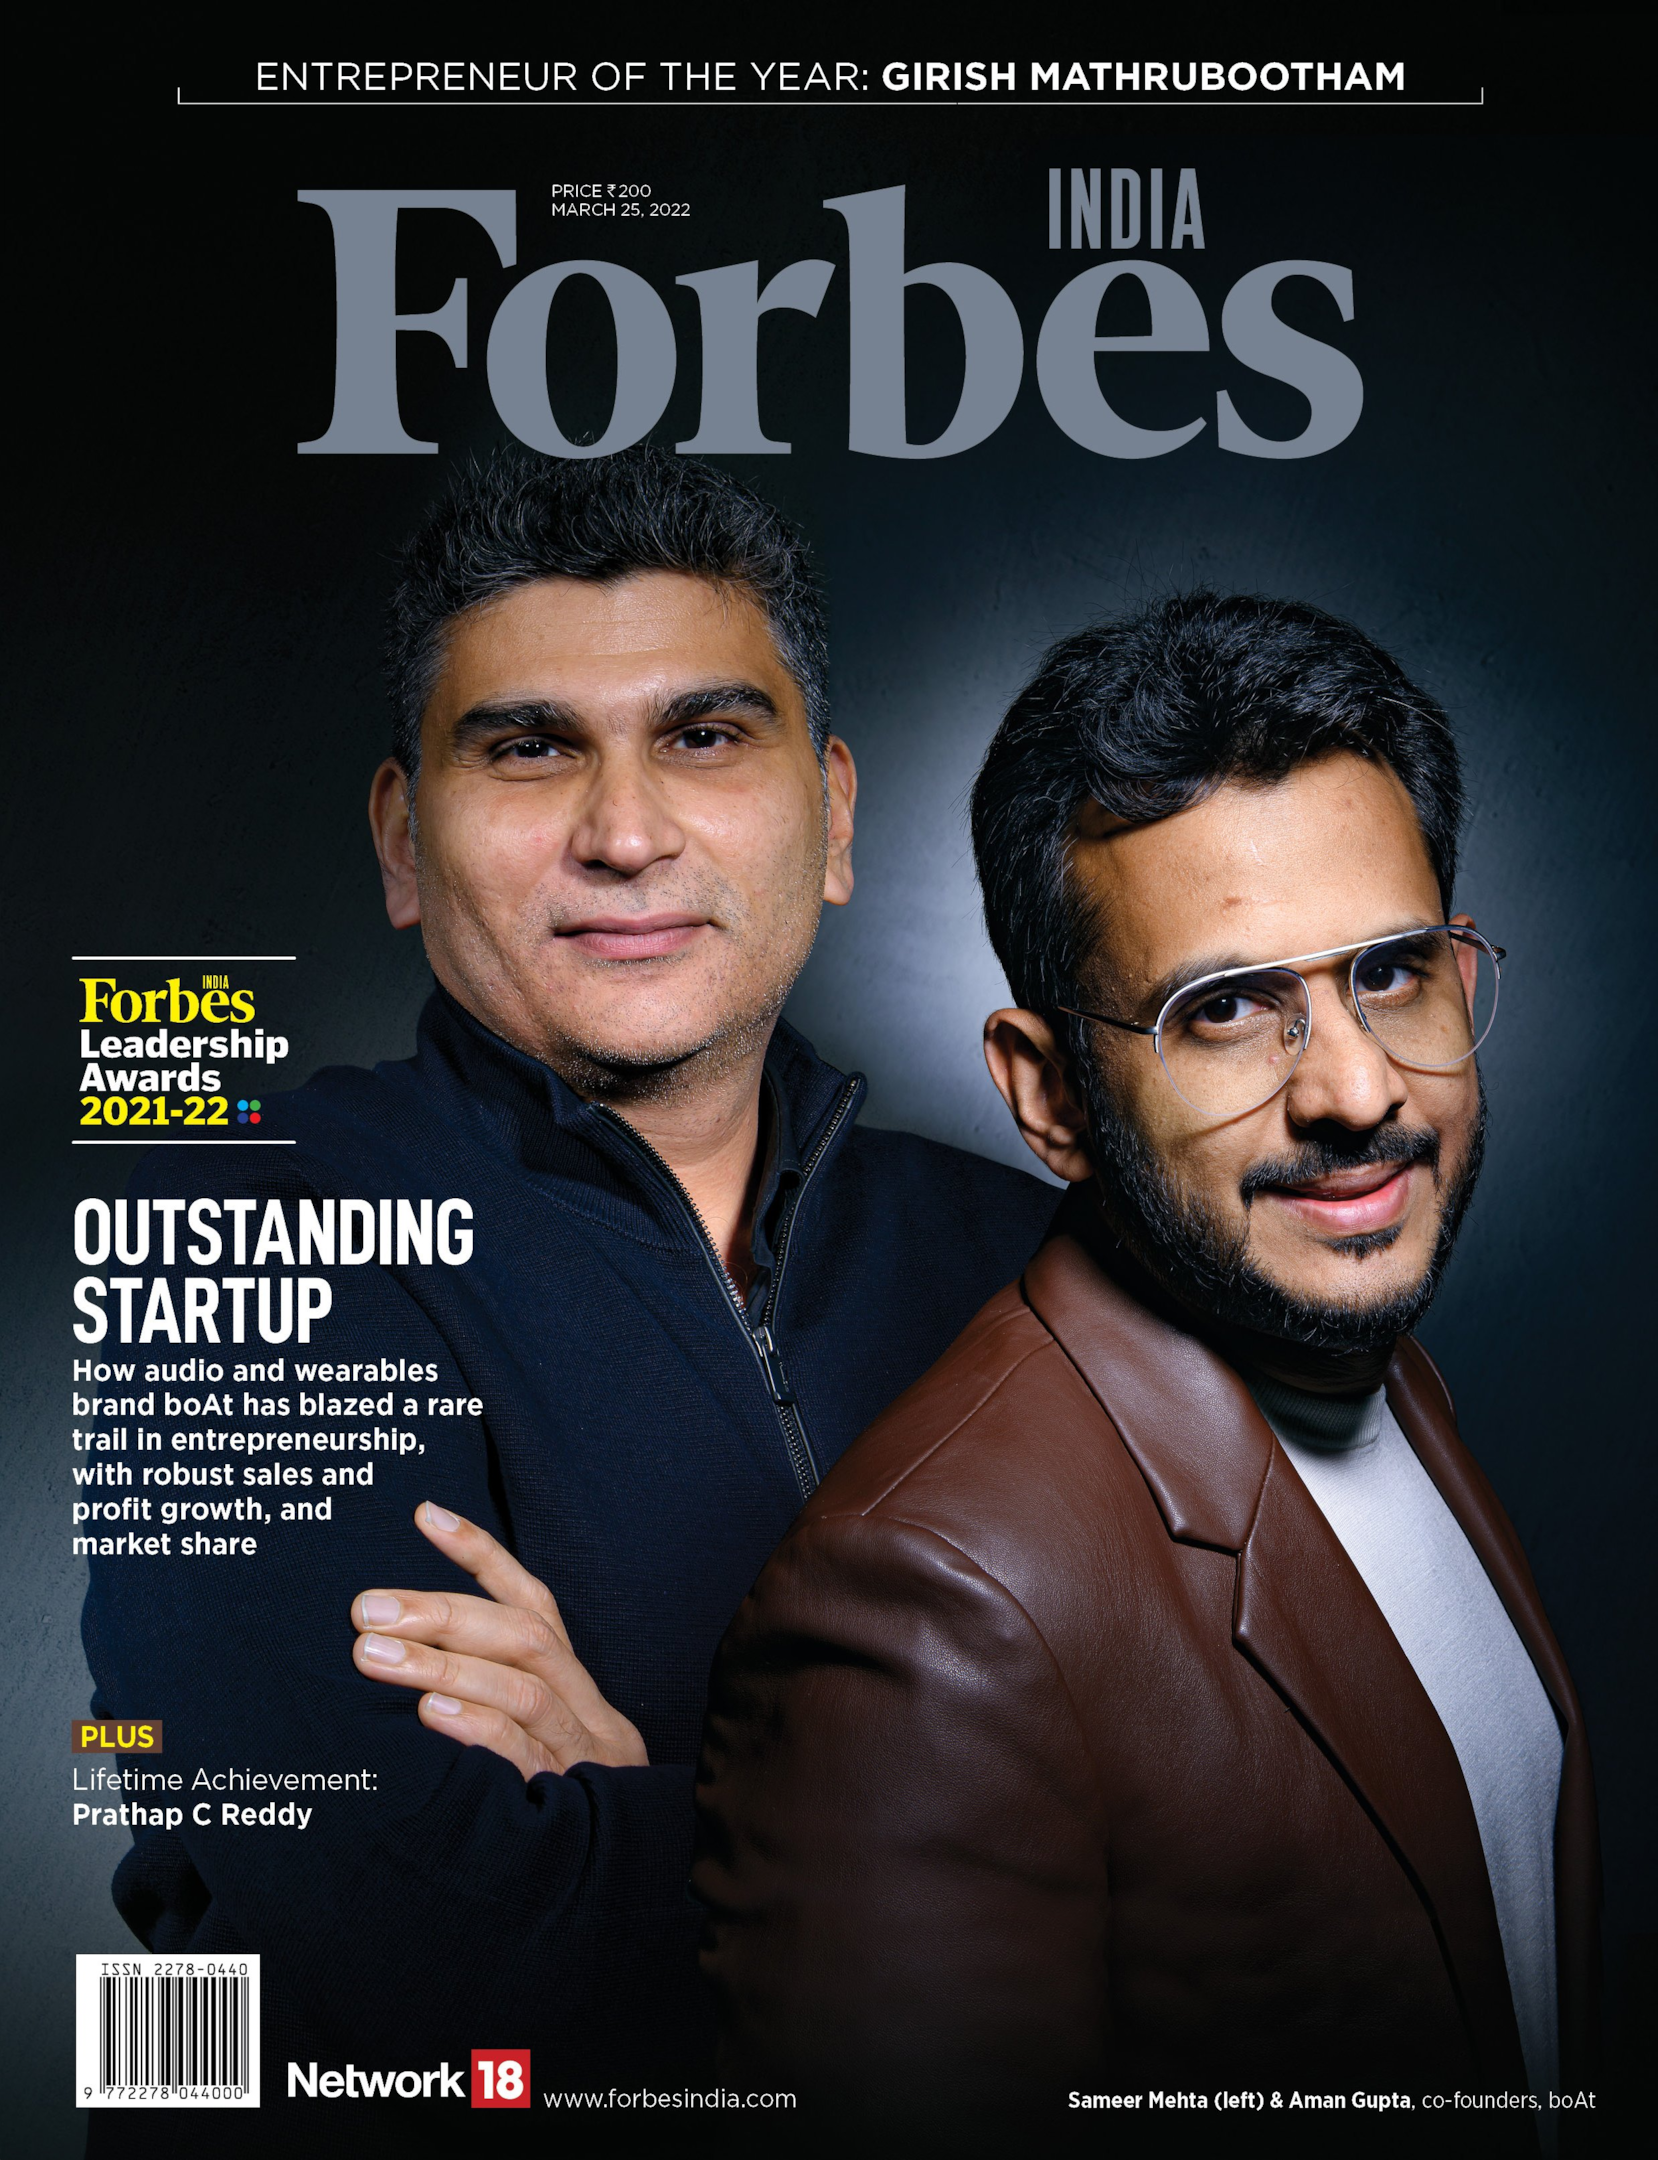  Image showcases Sameer Mehta and Aman Gupta in Forbes magazine's cover page